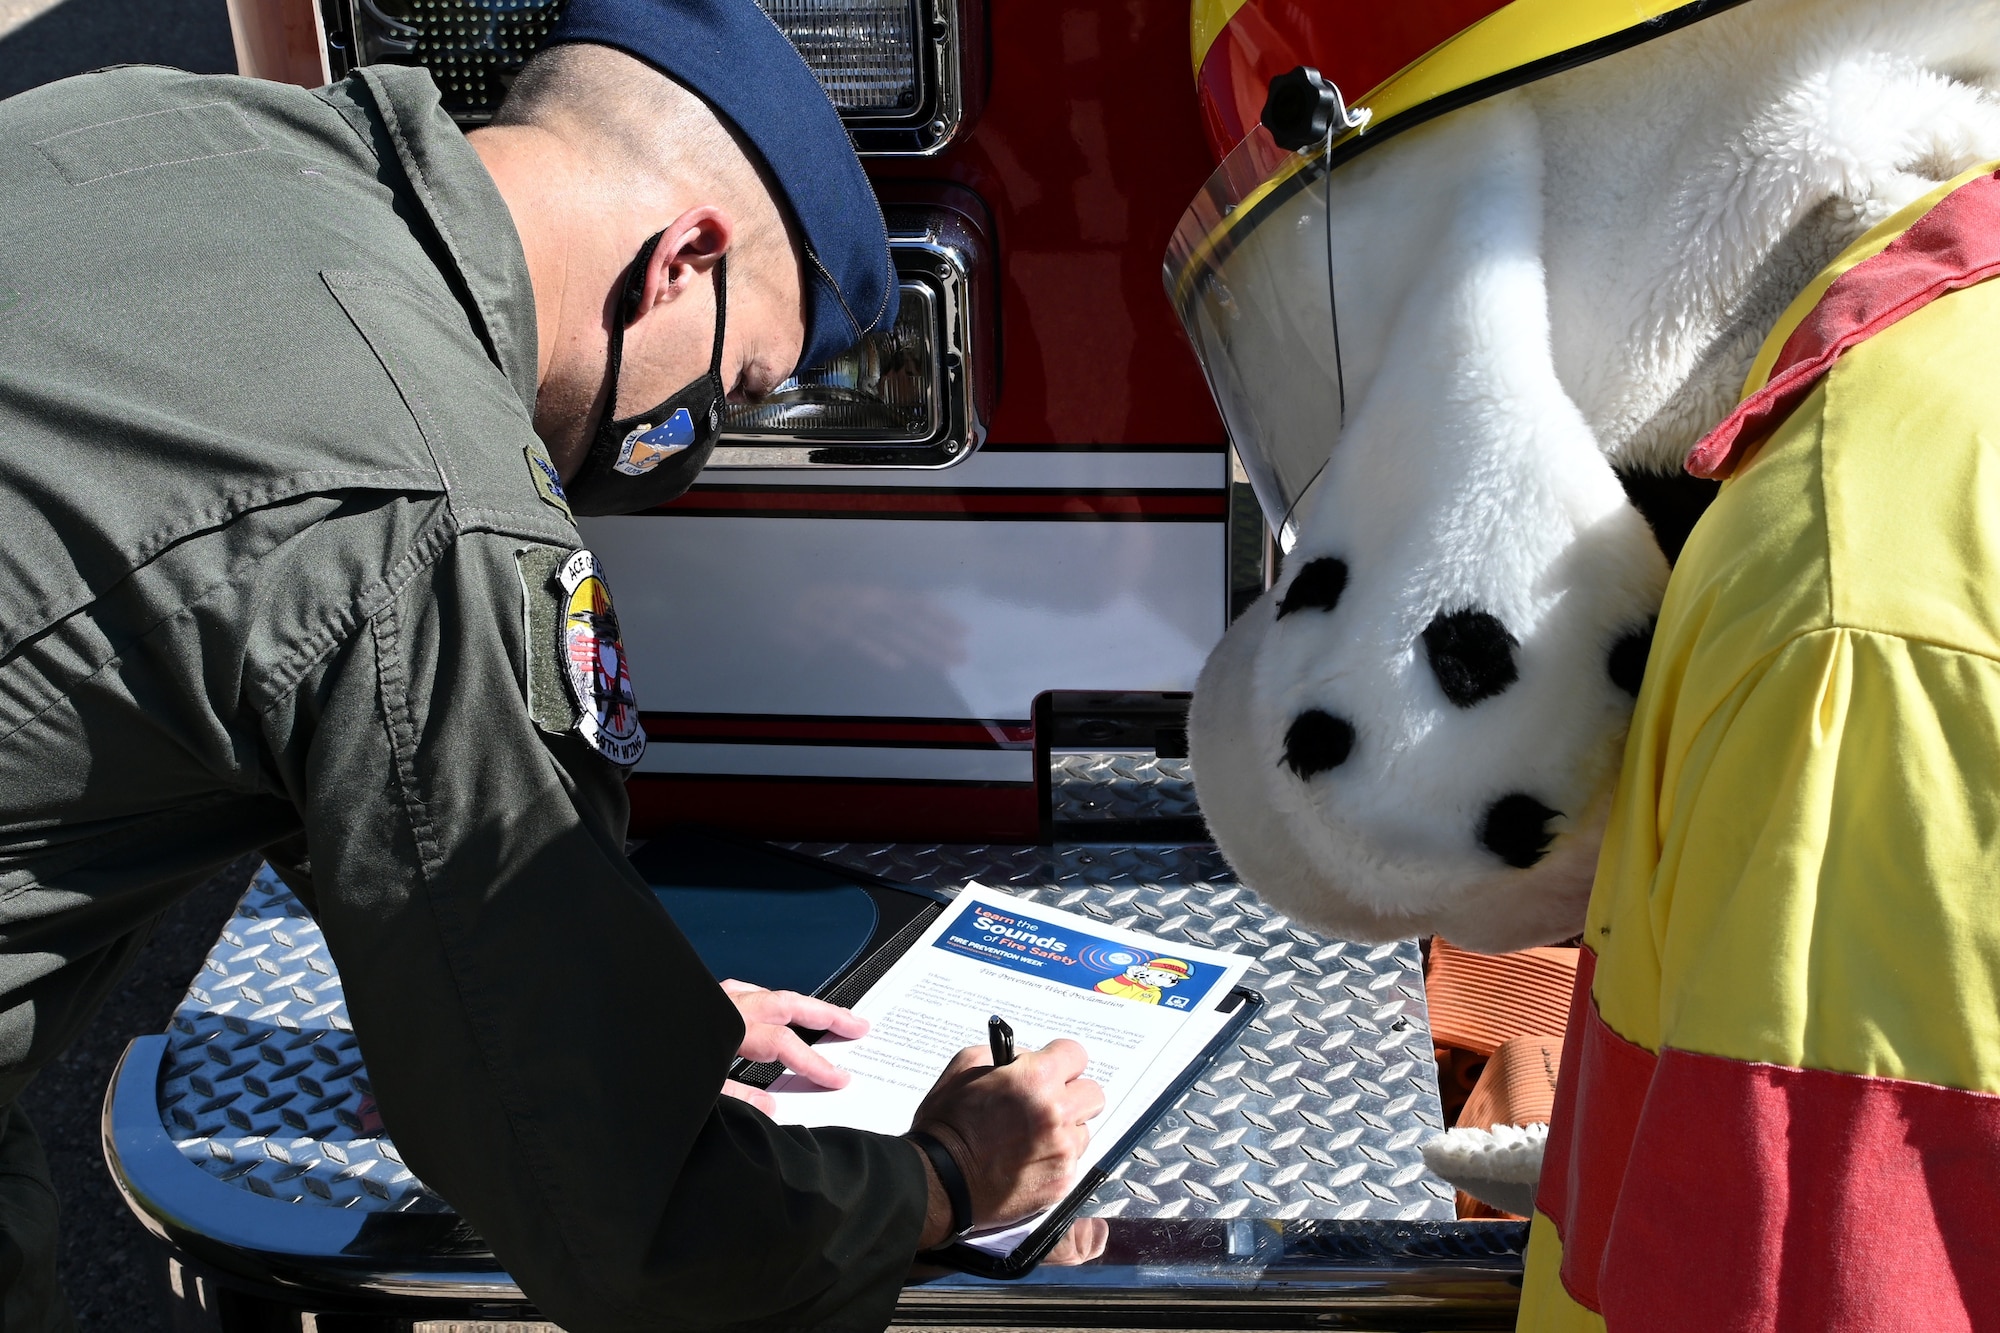 Col. Ryan Keeney, 49th Wing commander, signs the 2021 Fire Prevention Week proclamation with the National Fire Protection Association mascot ‘Sparky the Fire Dog’ Oct. 1, 2021 on Holloman Air Force Base, New Mexico. Fire Prevention Week is the longest running public health observance in the United States and pays homage to the Great Chicago Fire of 1871. (U.S. Air Force photo by Staff Sgt. Christopher Sparks)